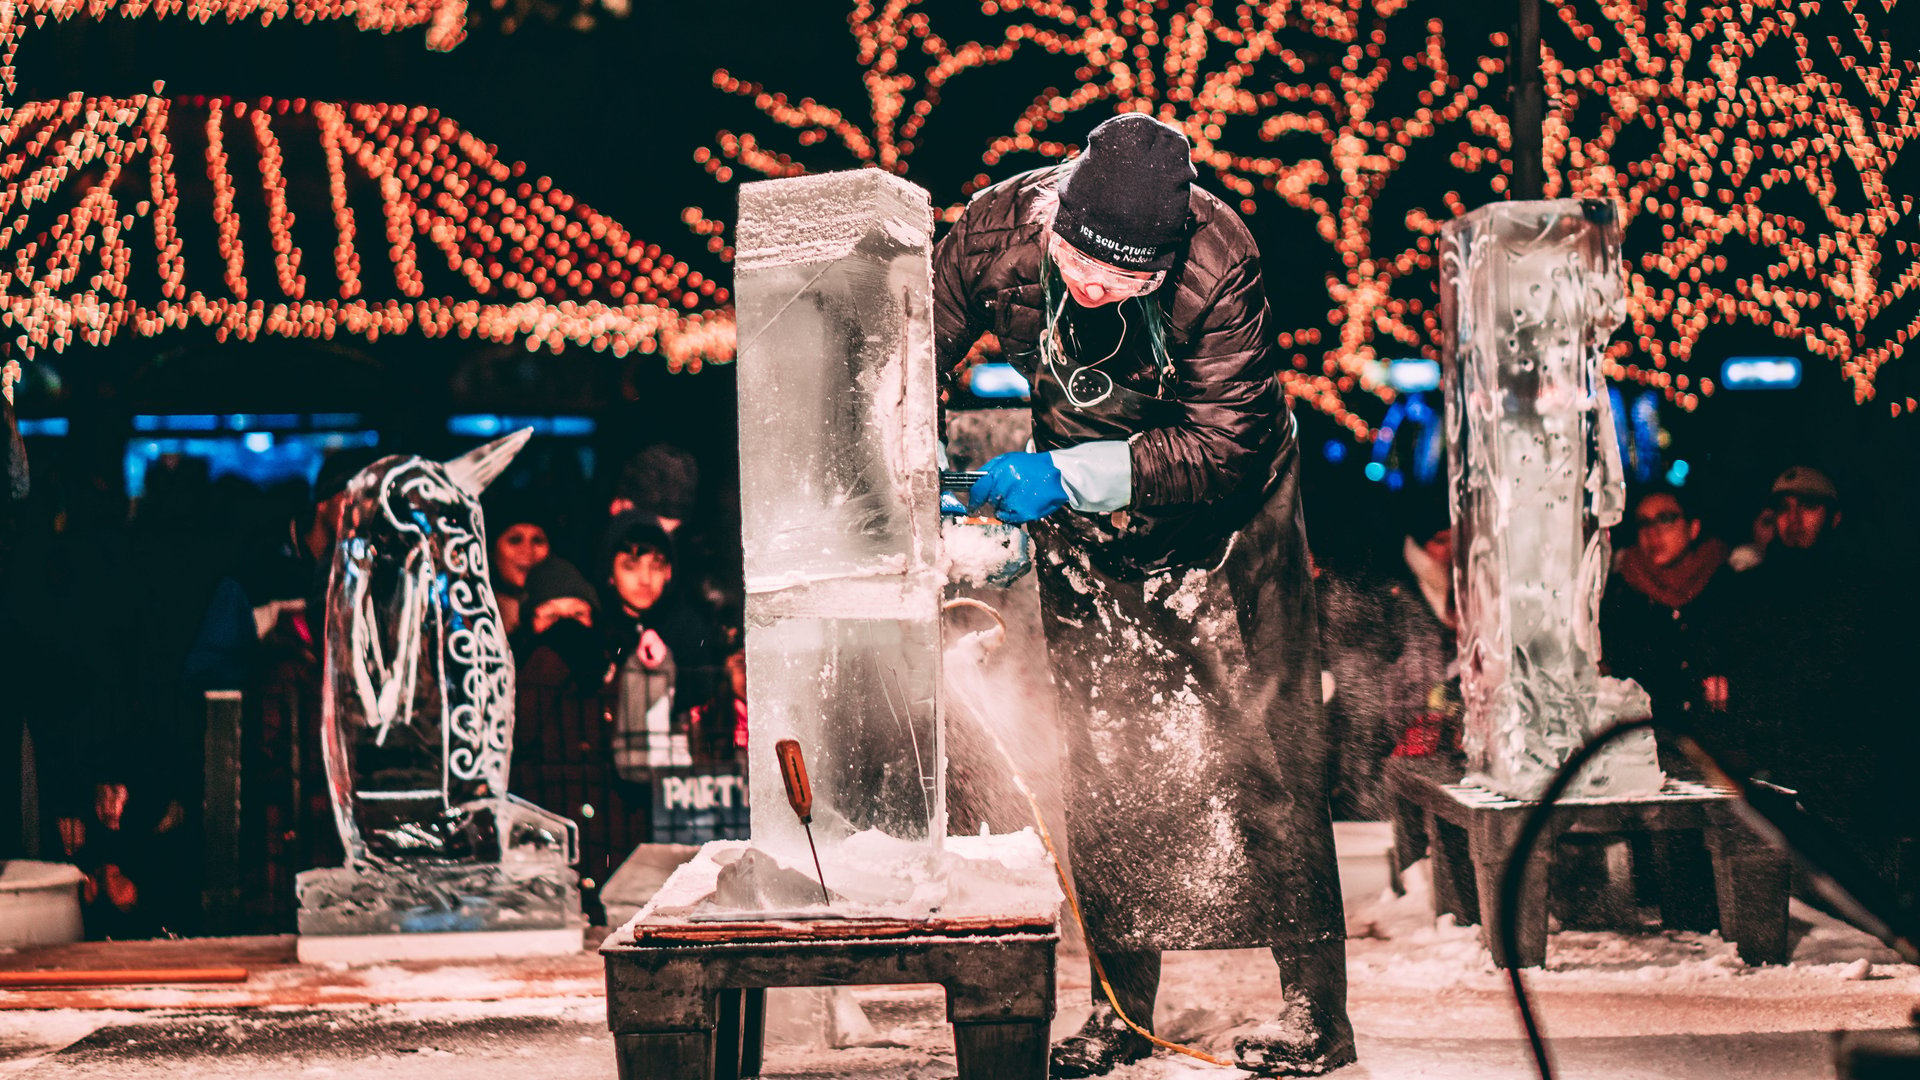 ice sculpture being made